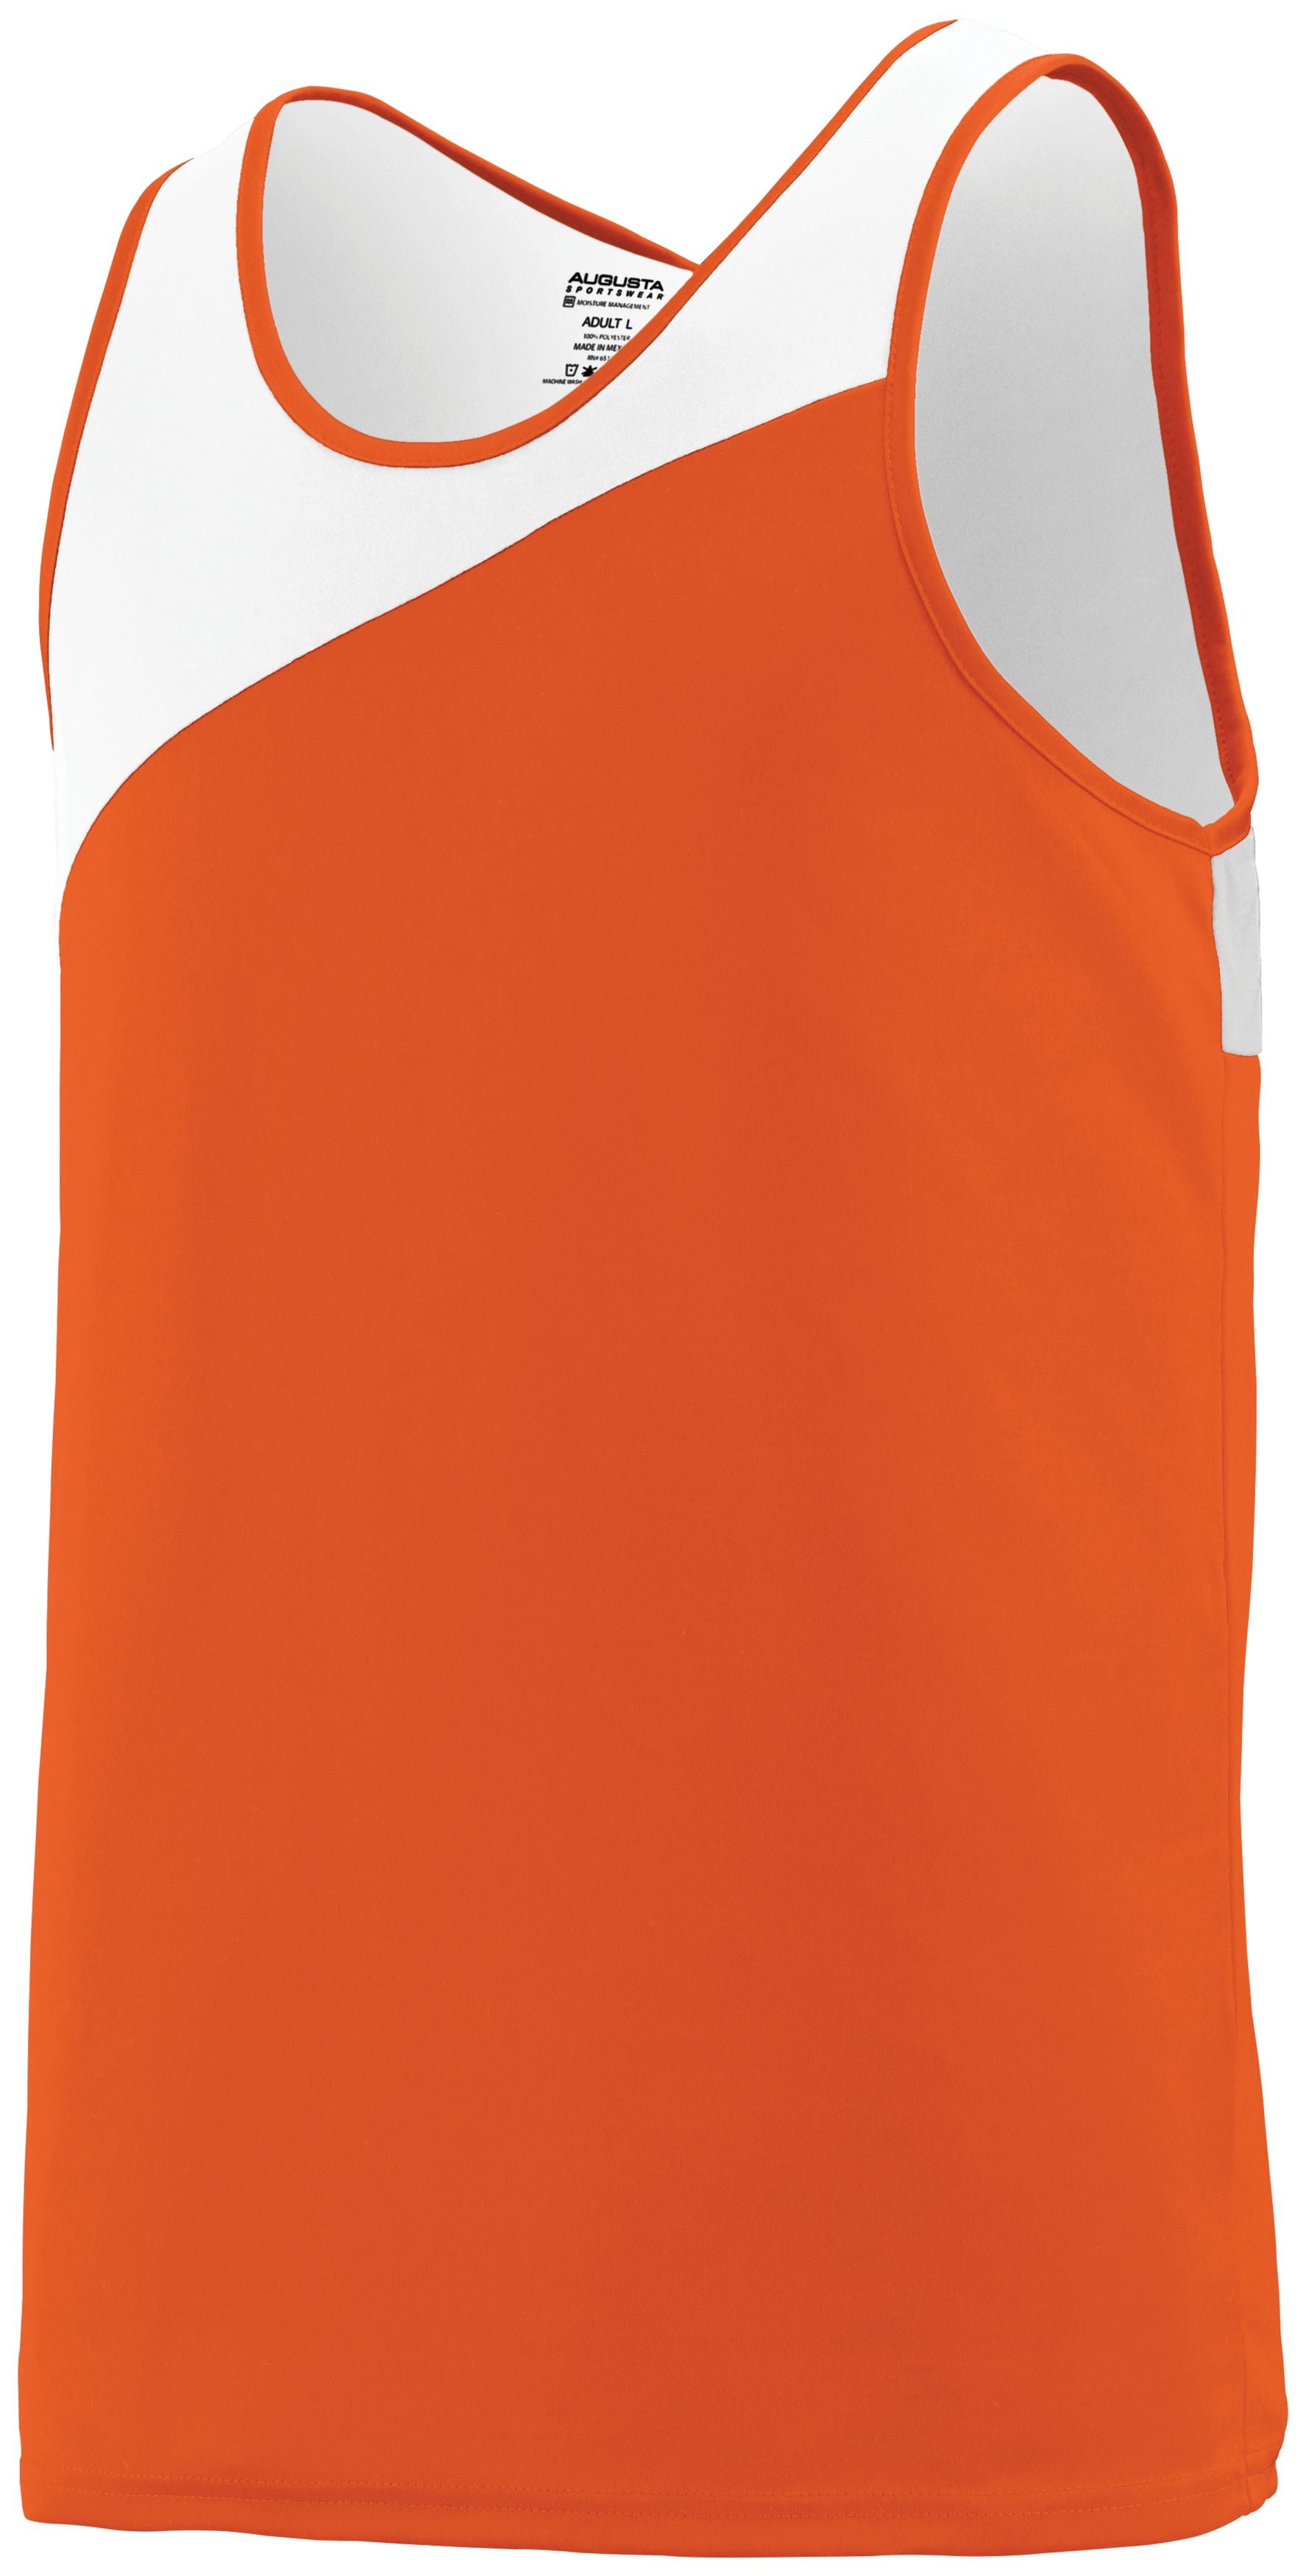 Augusta Sportswear Accelerate Jersey in Orange/White  -Part of the Adult, Adult-Jersey, Augusta-Products, Track-Field, Shirts product lines at KanaleyCreations.com